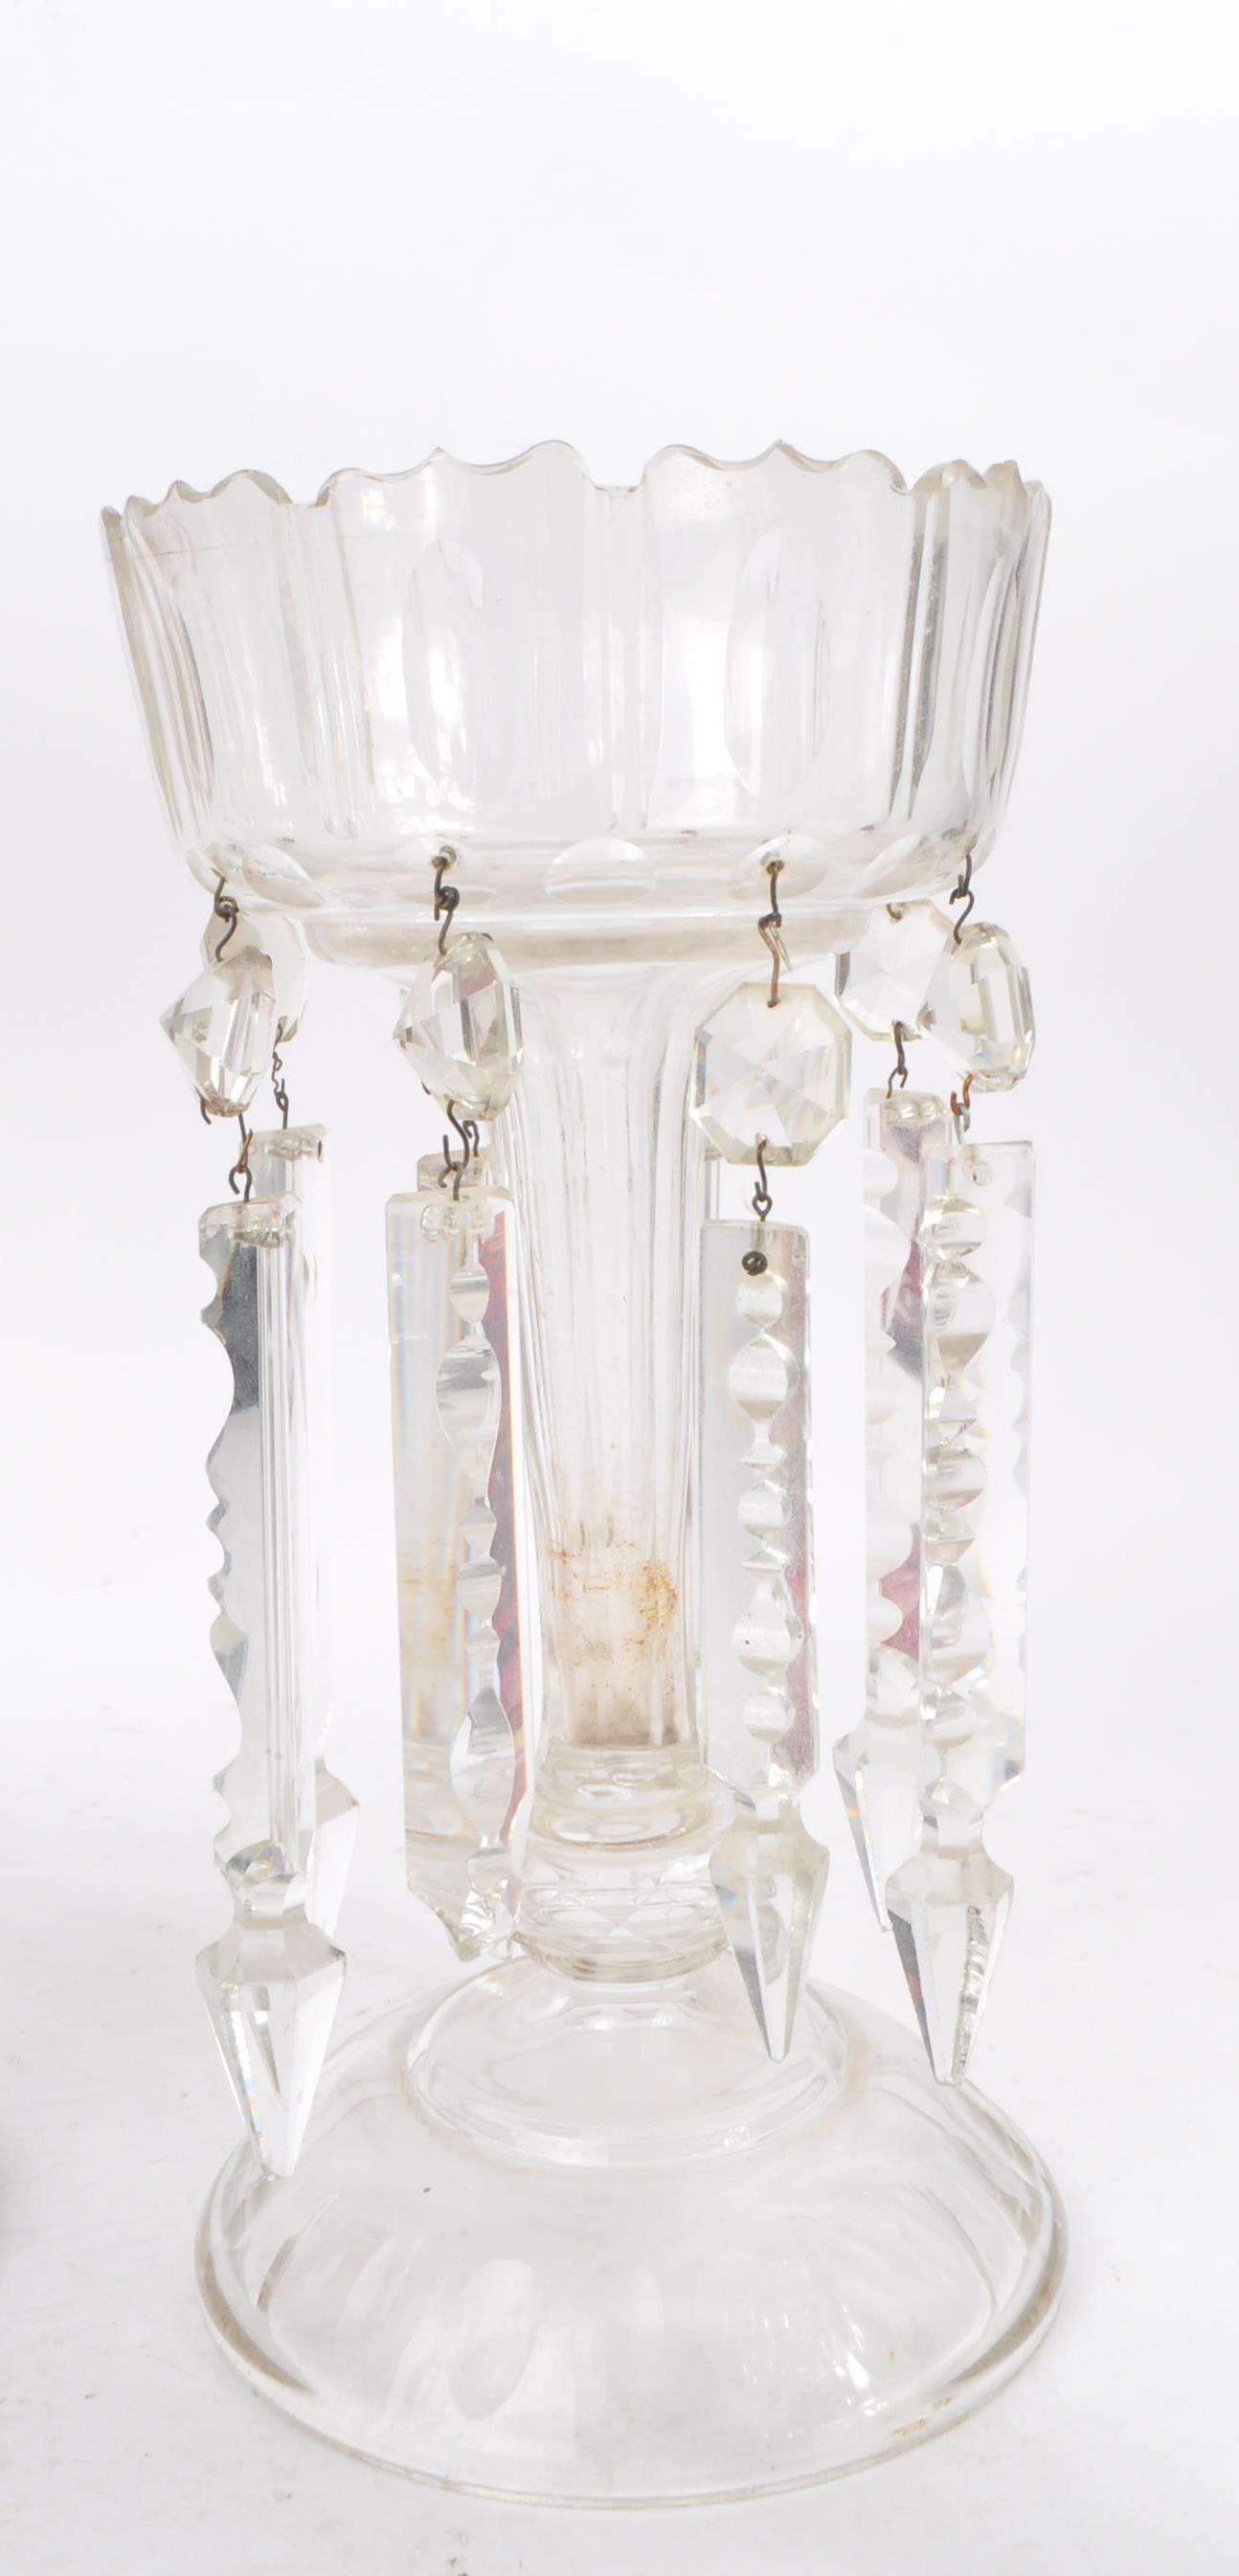 COLLECTION OF FOUR BOHEMIAN CUT GLASS LUSTRE VASES - Image 4 of 10